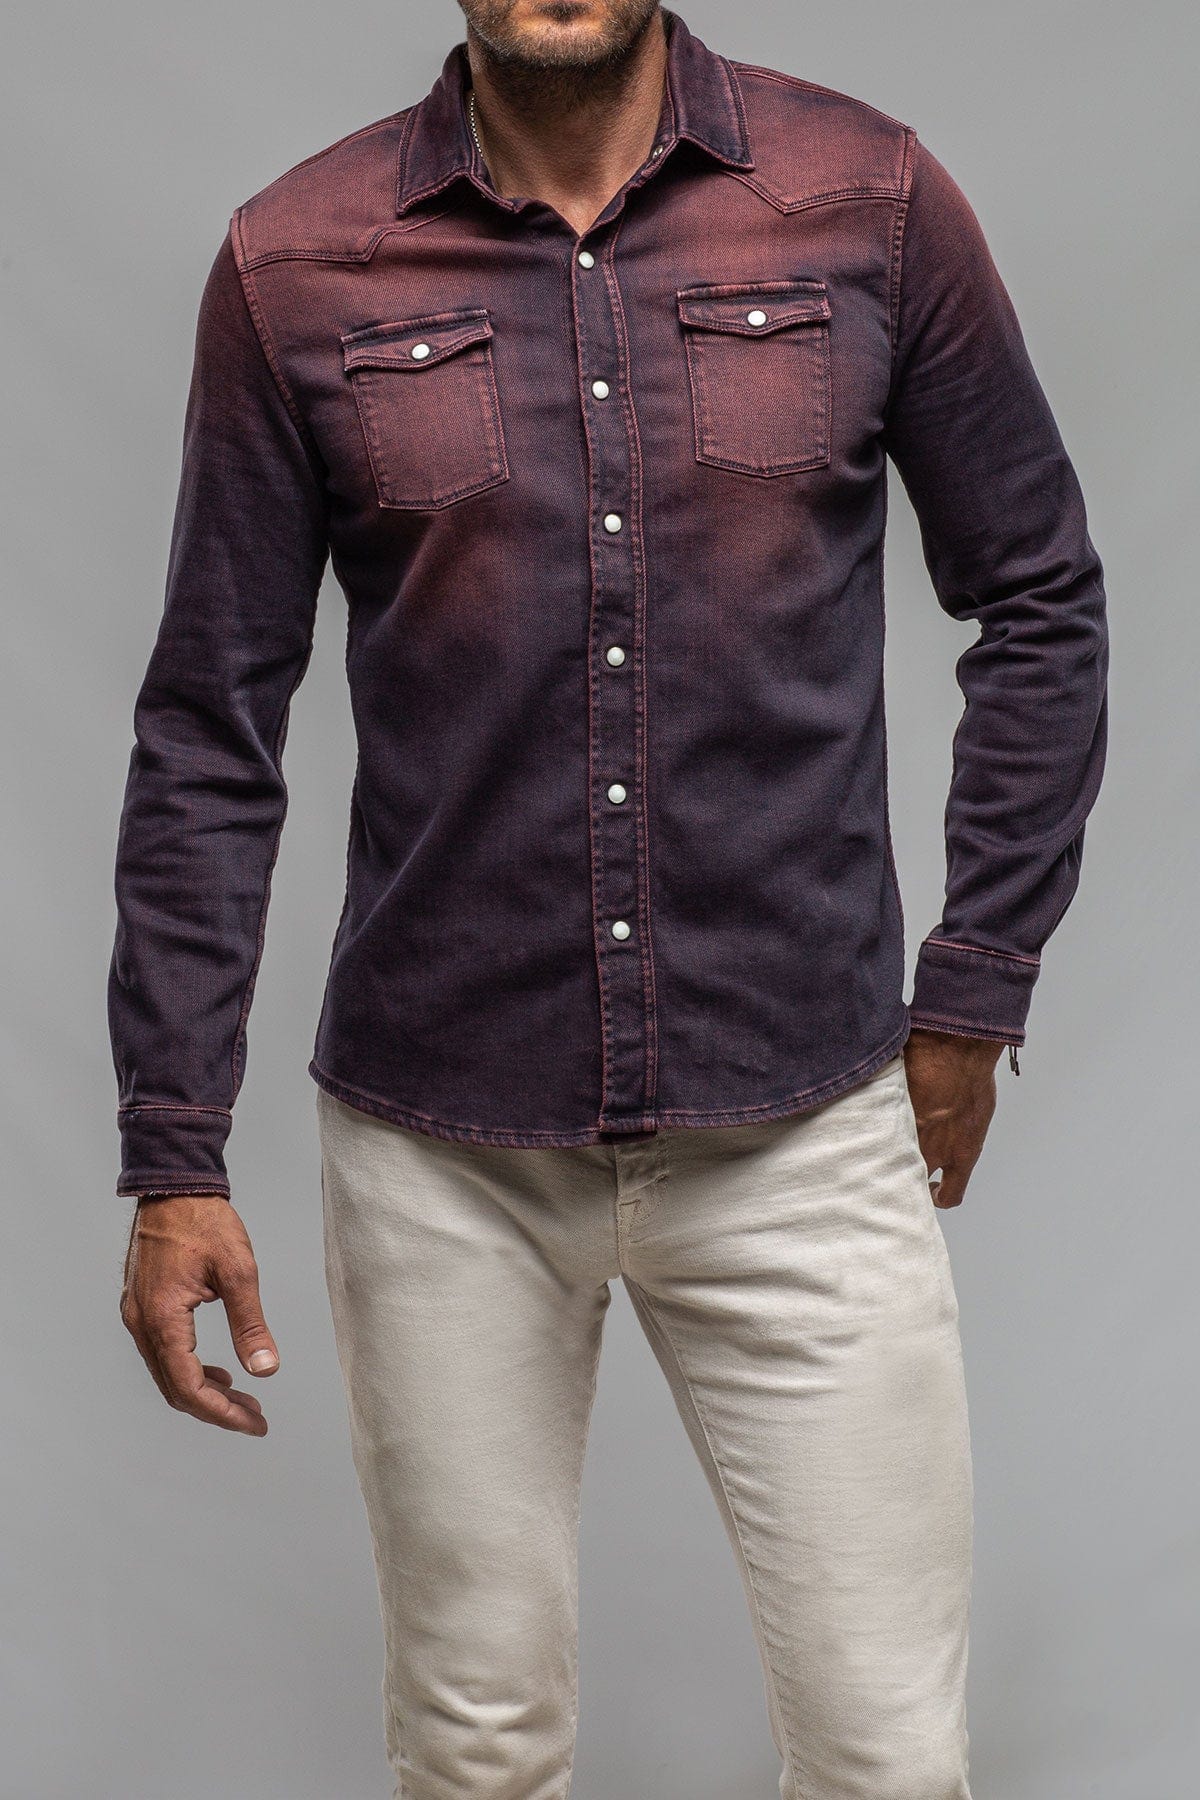 Roper Over-Dyed Western Snap Shirt In Bordeaux - AXEL'S